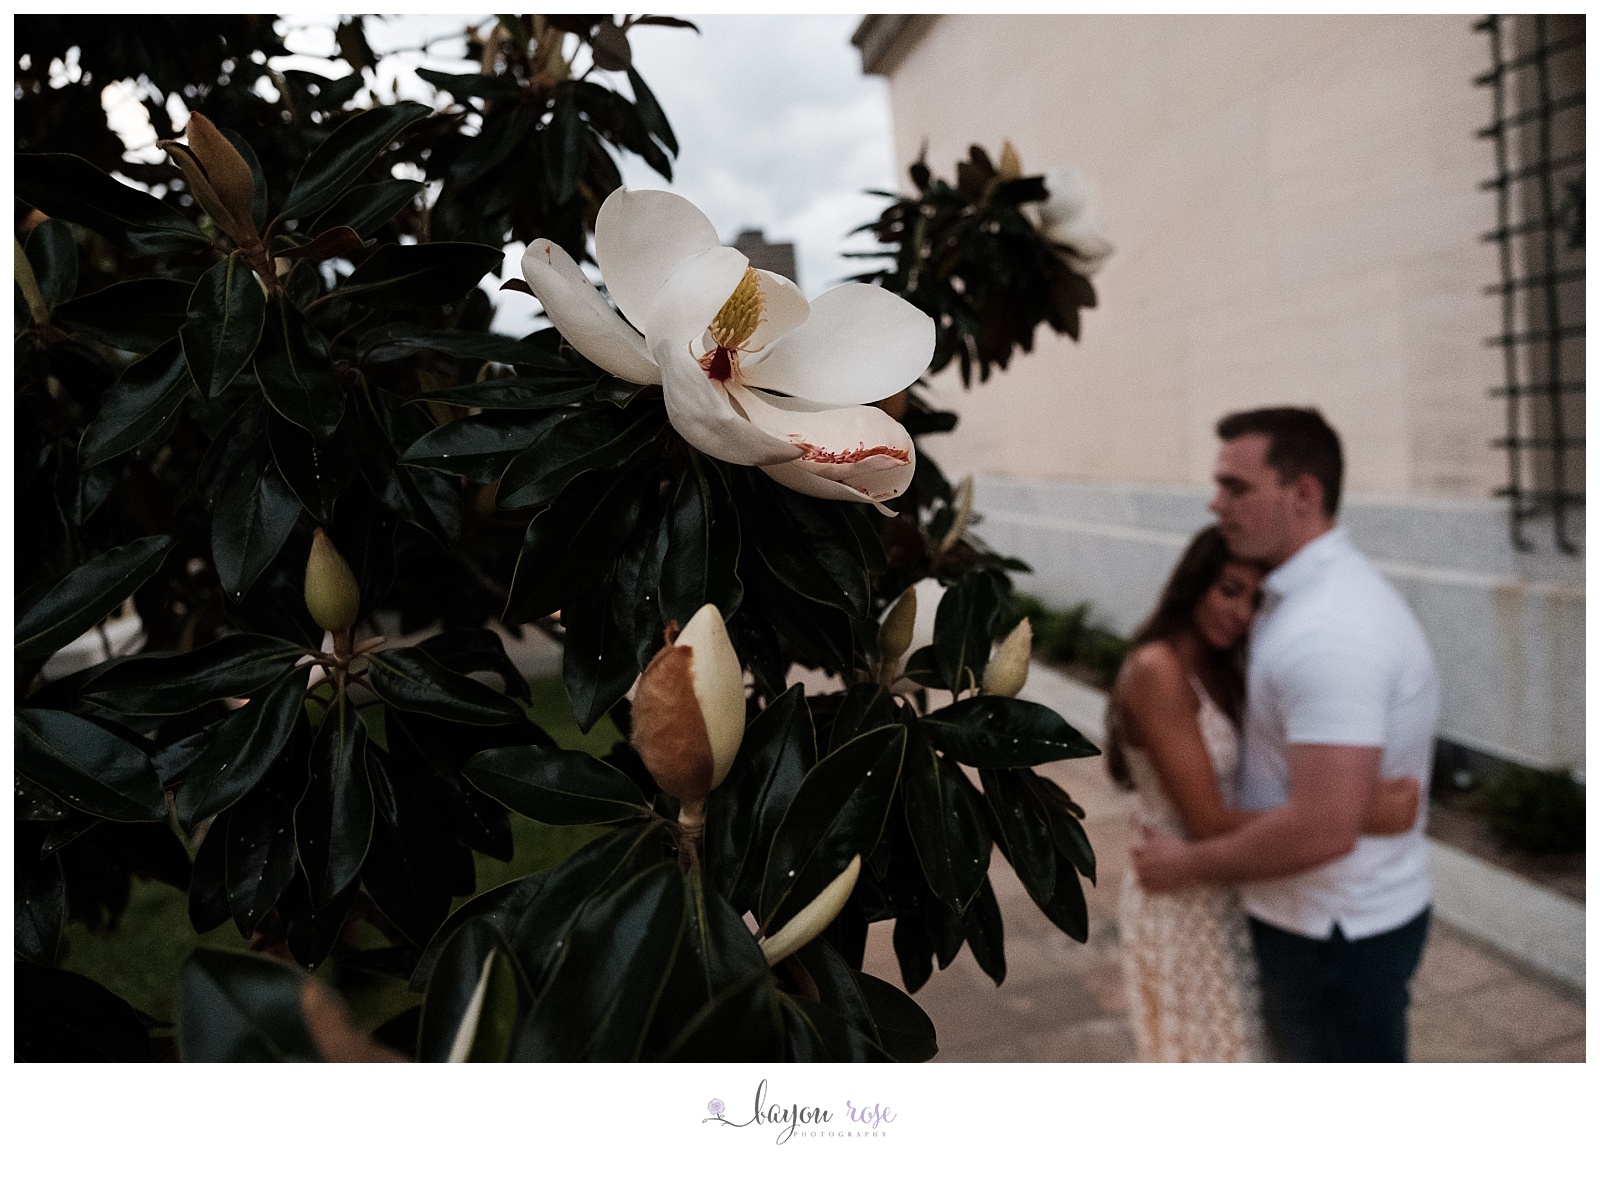 magnolia on tree with couple in background